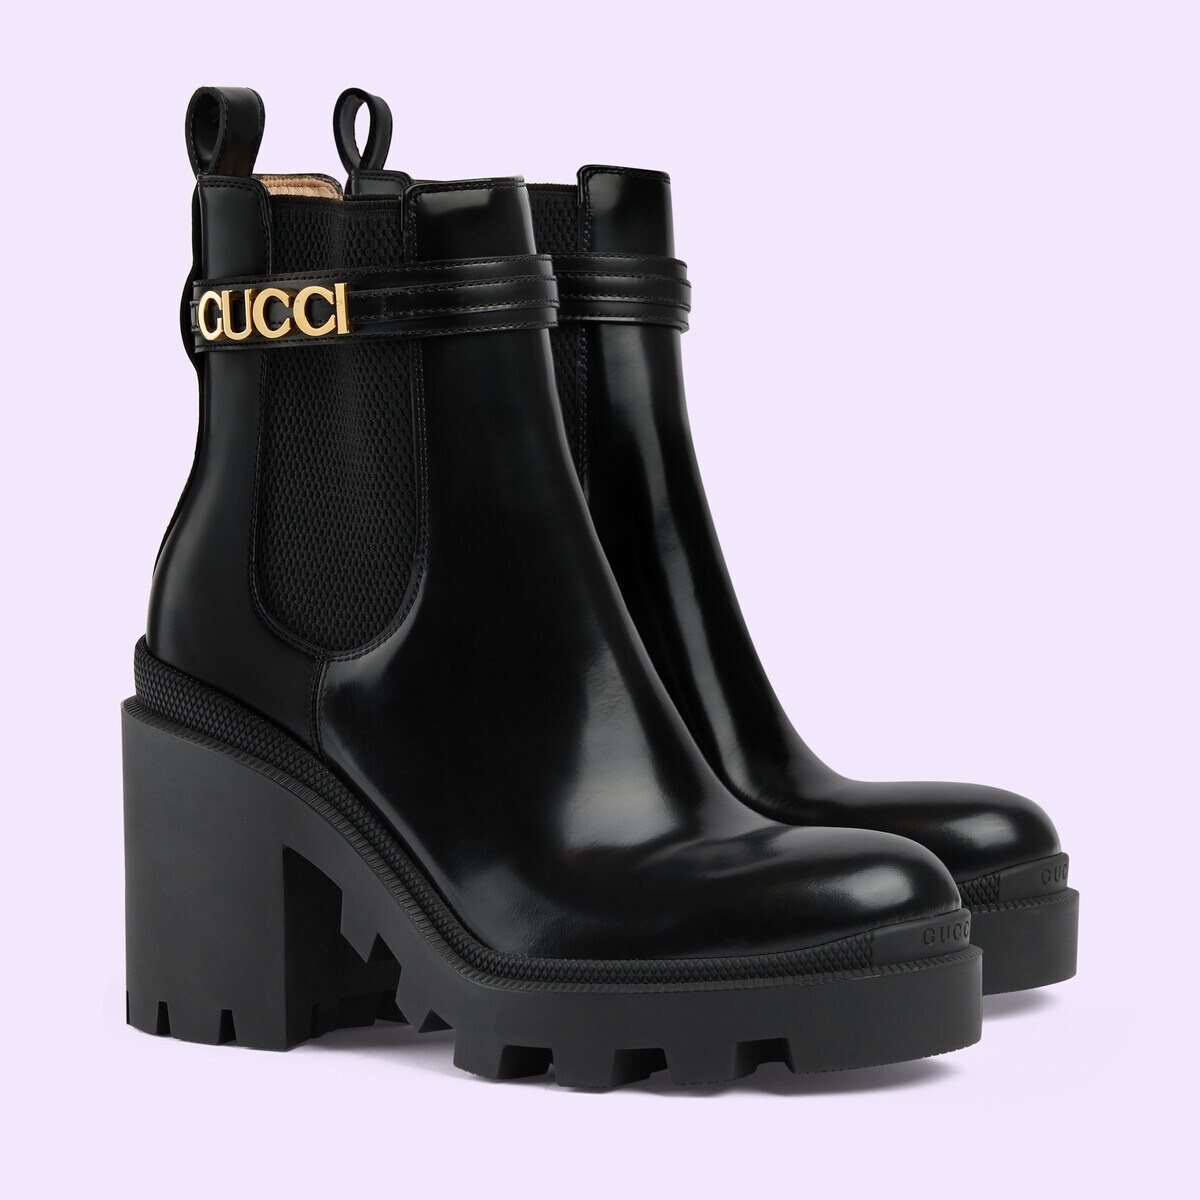 Women's ankle boot with logo - 2